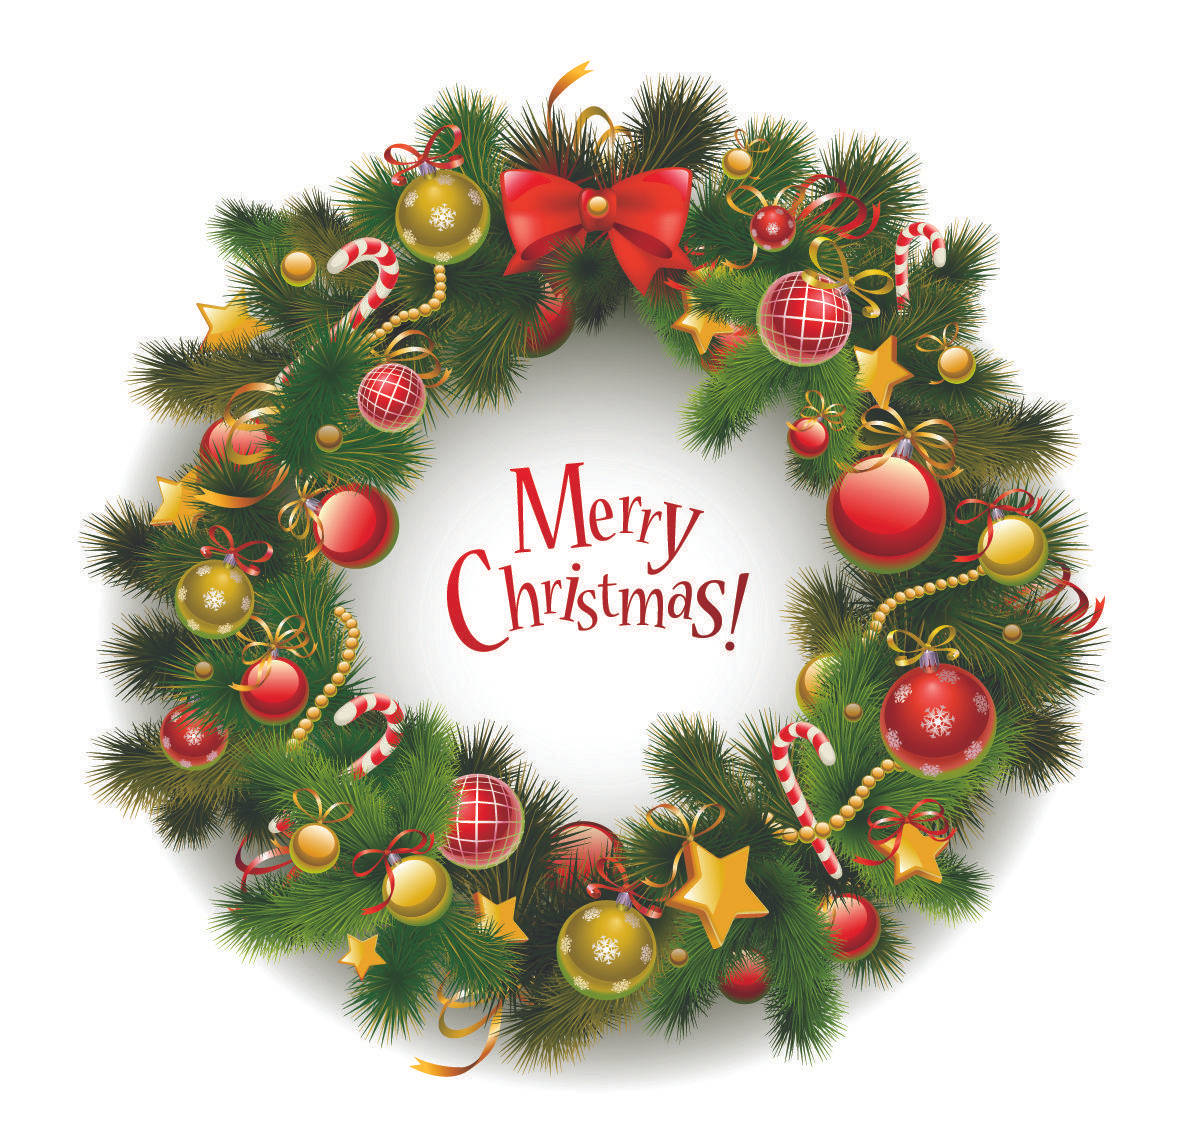 Merry Christmas Wreath Graphic Background